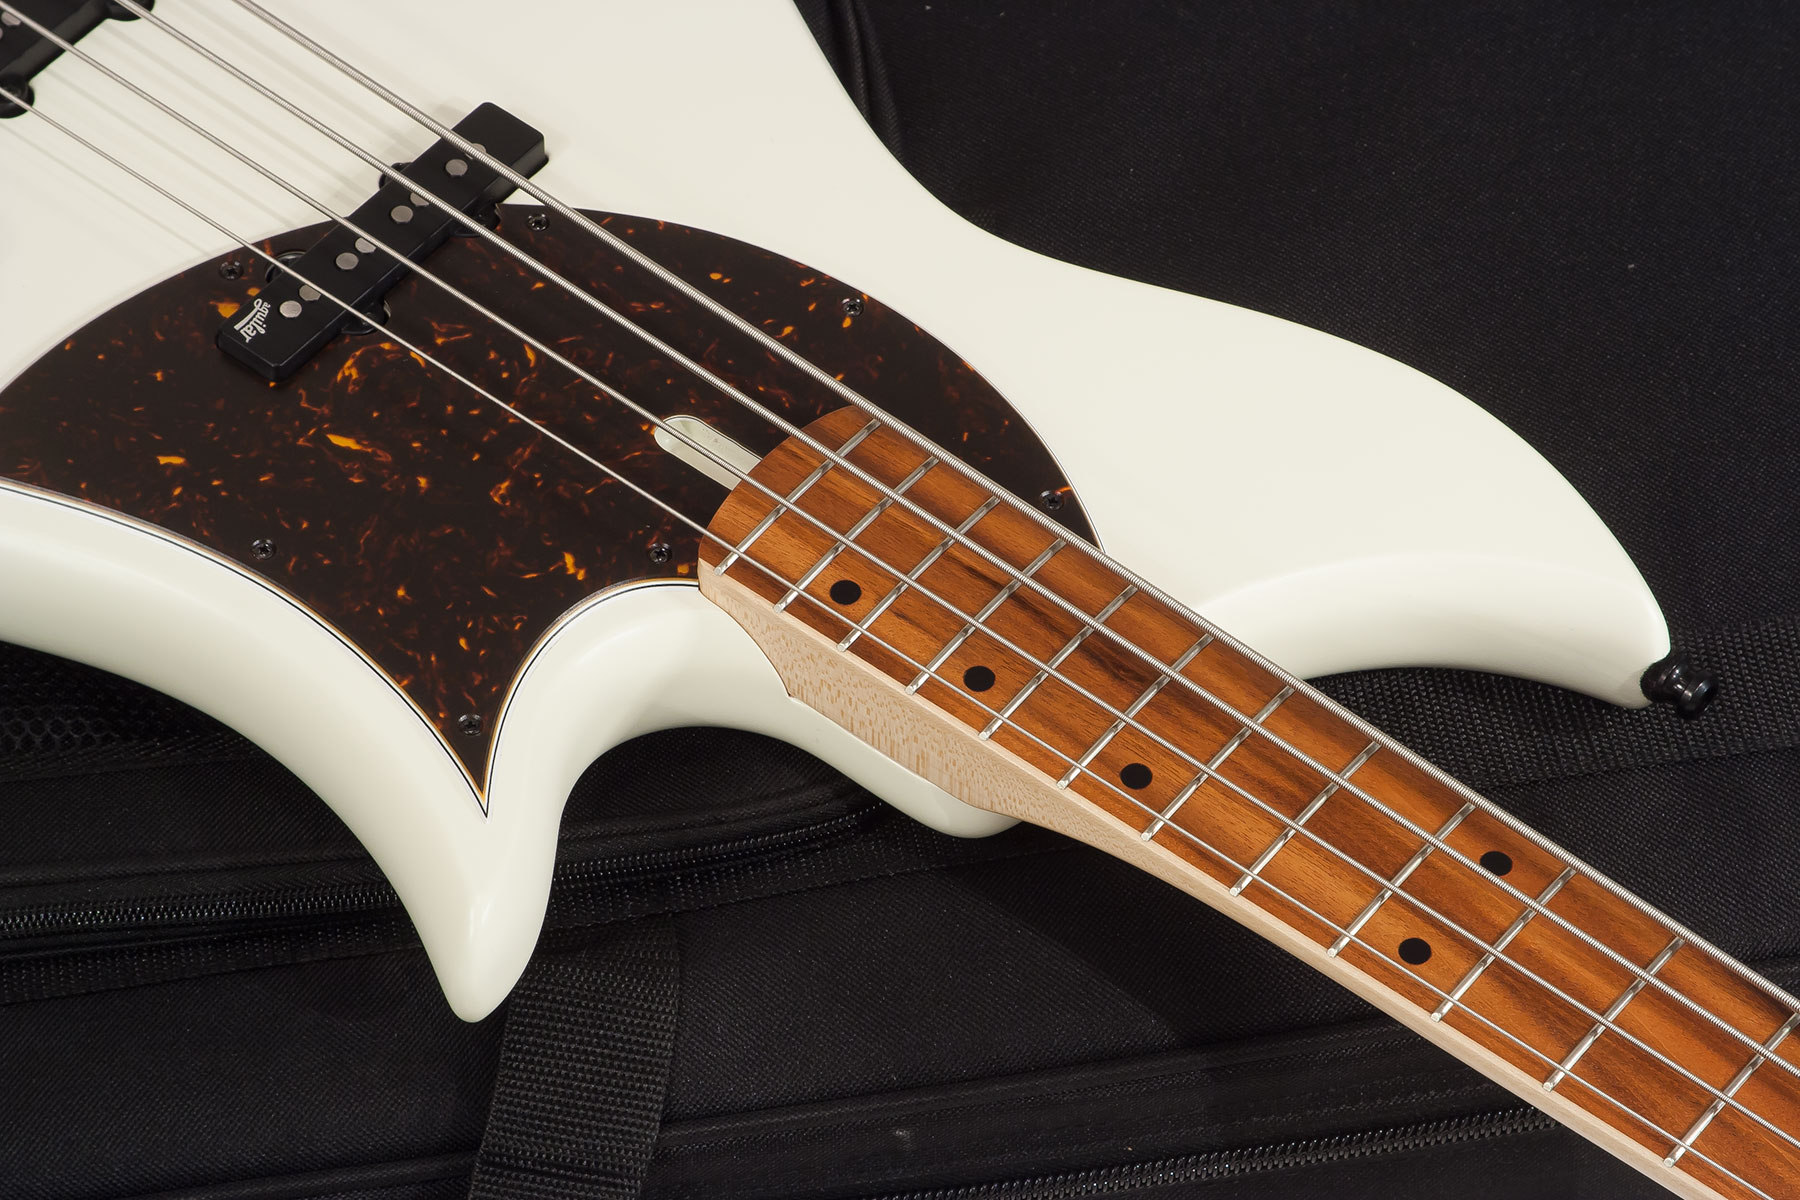 Aquilina Sirius 4 Standard Rw - White - Solid body electric bass - Variation 2